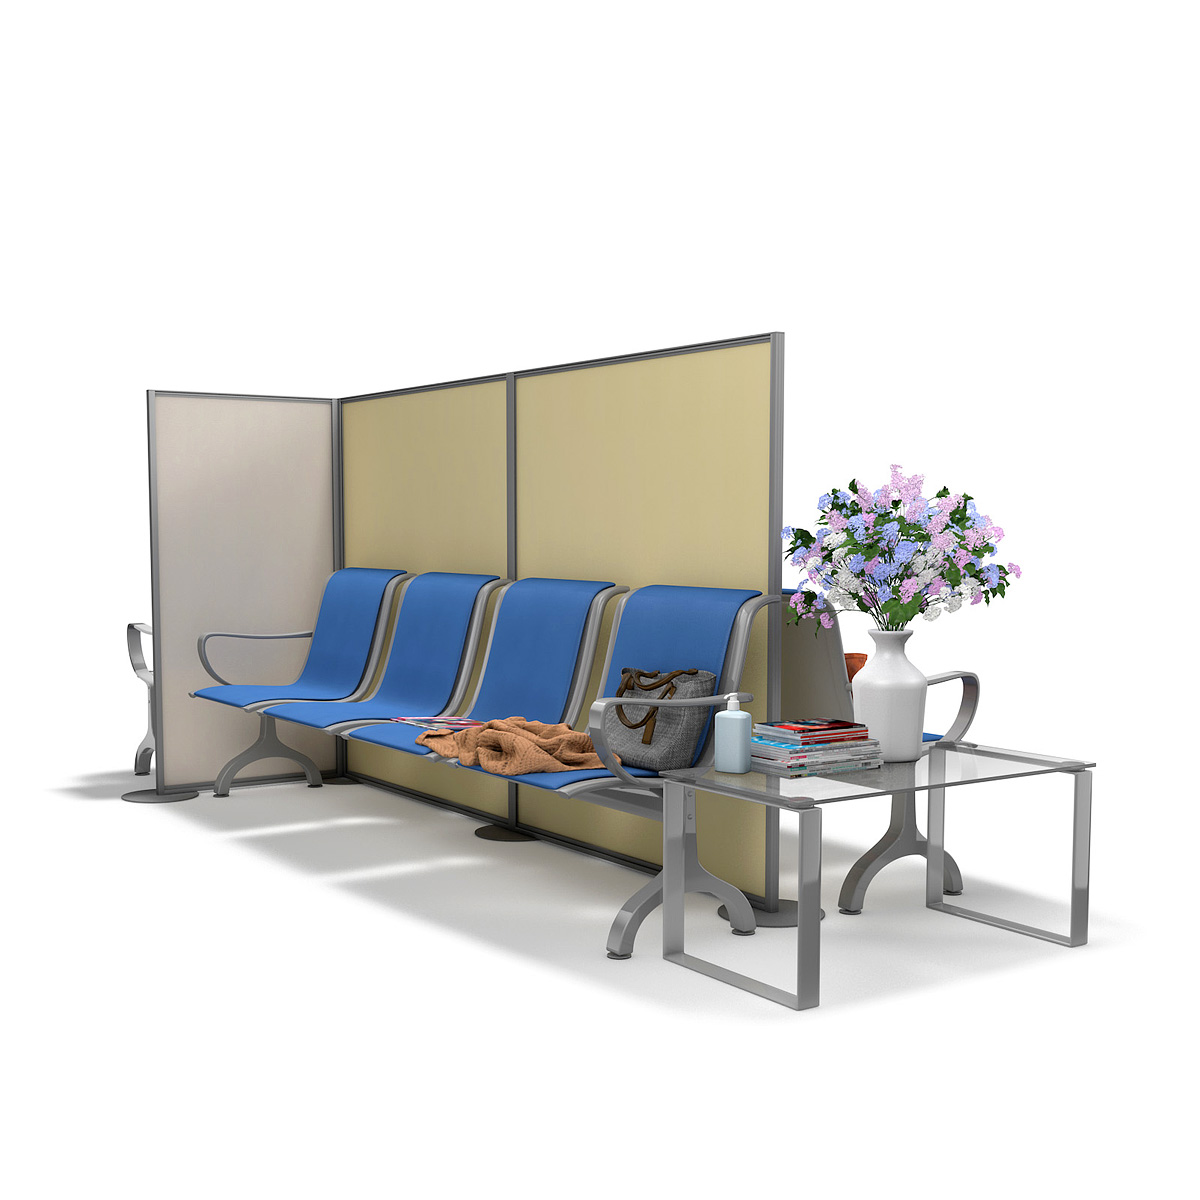 FRONTIER® Medical Screens Freestanding Can be Used On Hospital Wards, in Waiting Rooms And Reception Areas